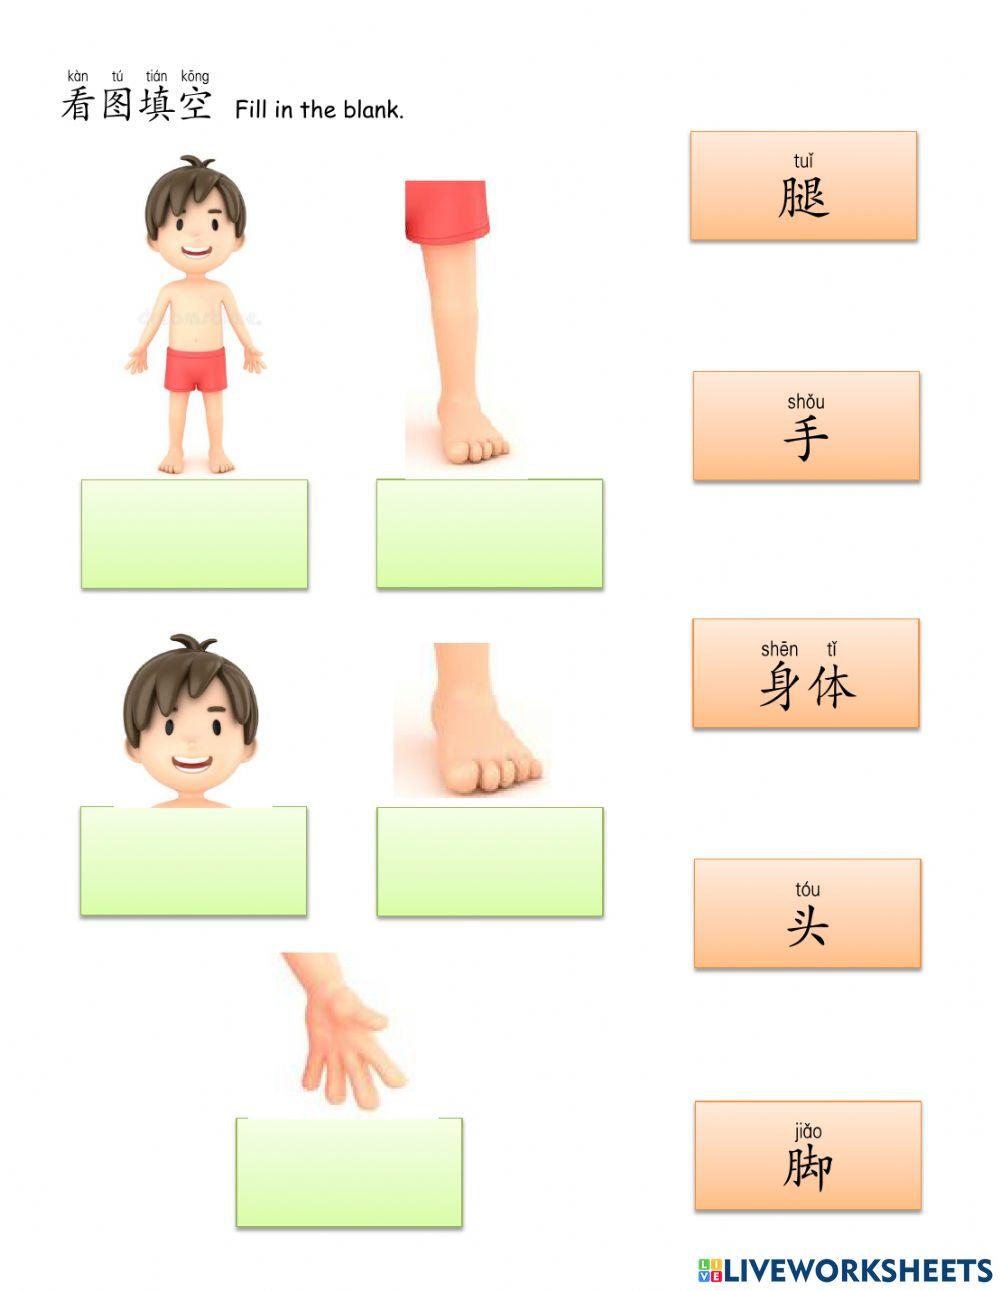 Chinese Language - Parts of the body